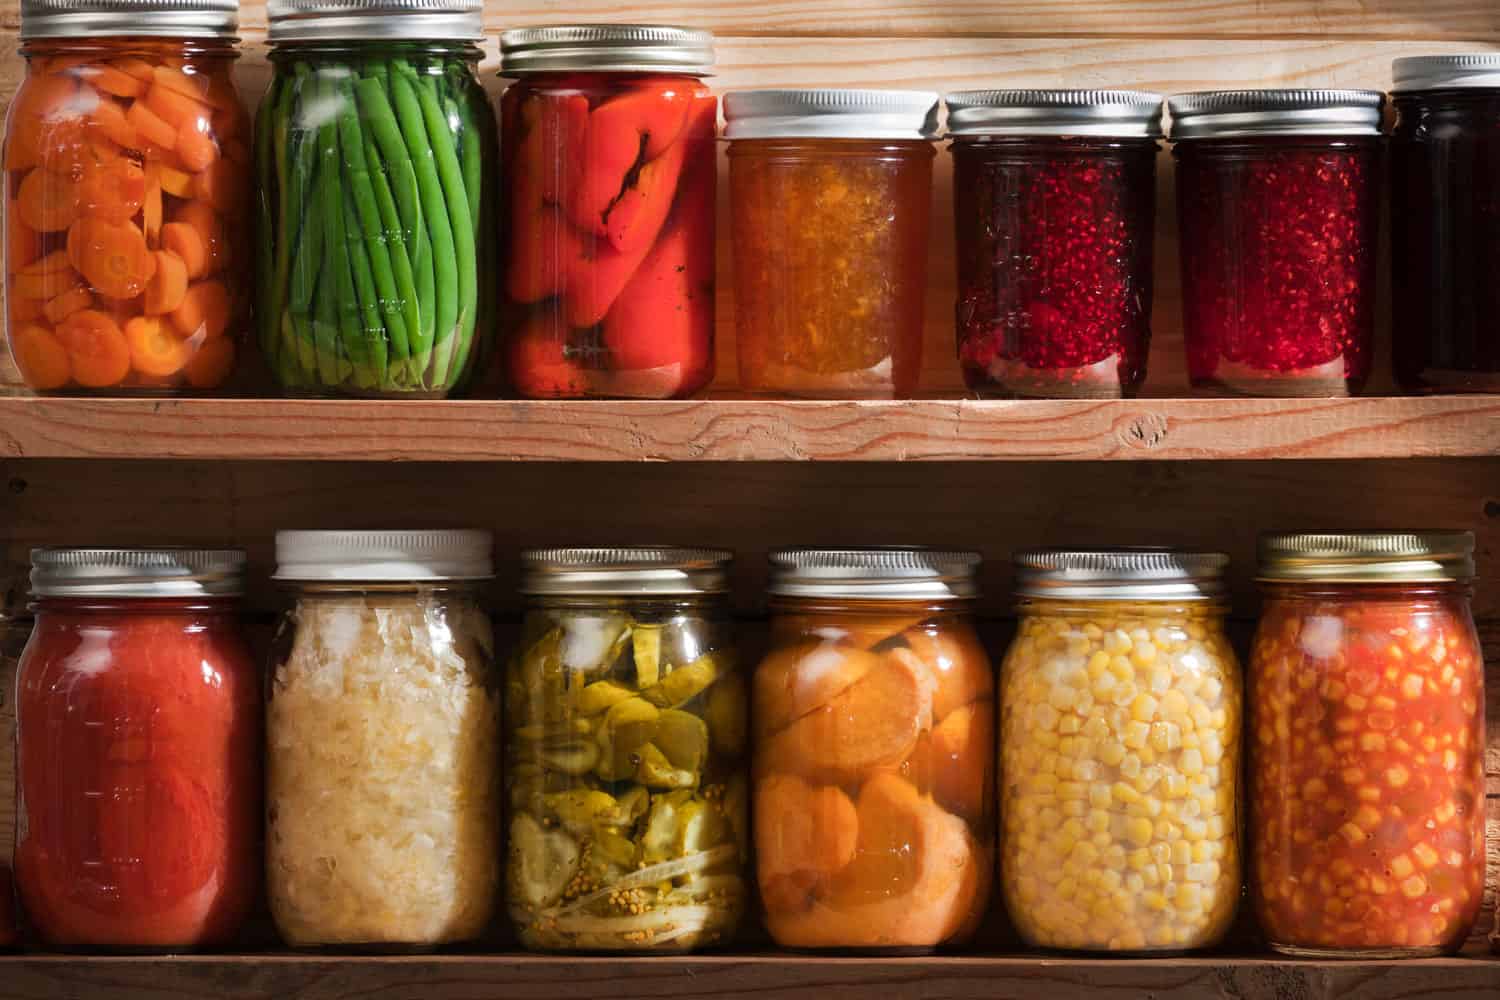 Two wooden shelves holding a variety of canned vegetables and fruits, lined up in rows of glass jars